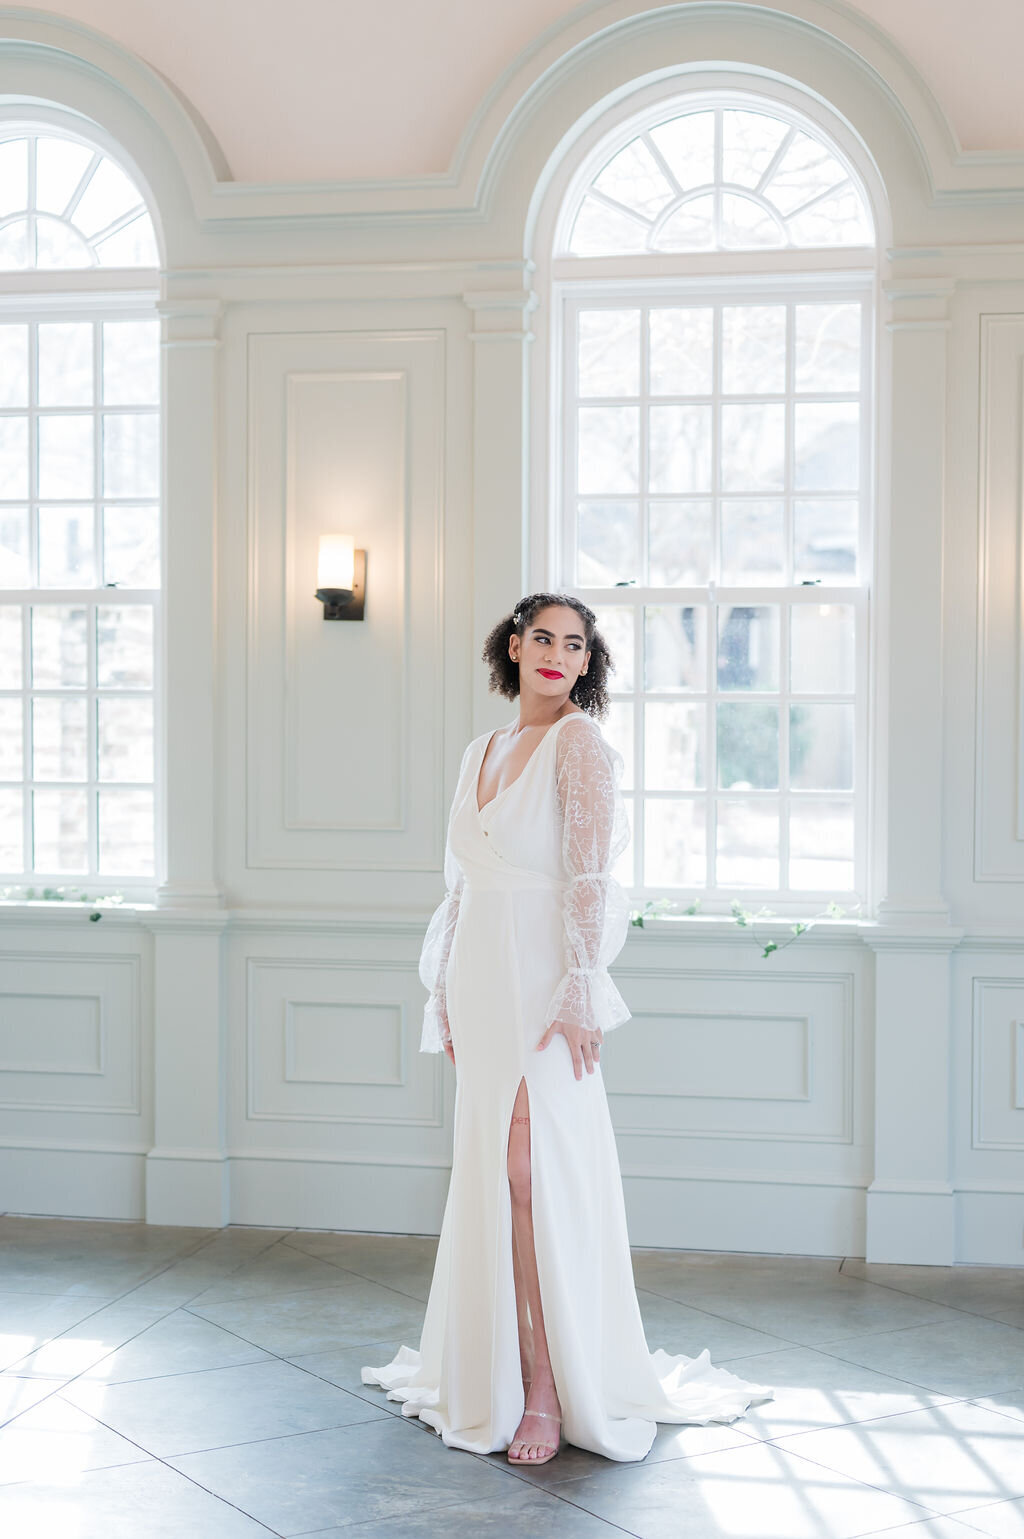 The Harlow style is a sheer long sleeve crepe wedding dress in a fit and flare silhouette by indie bridal designer Edith Elan.